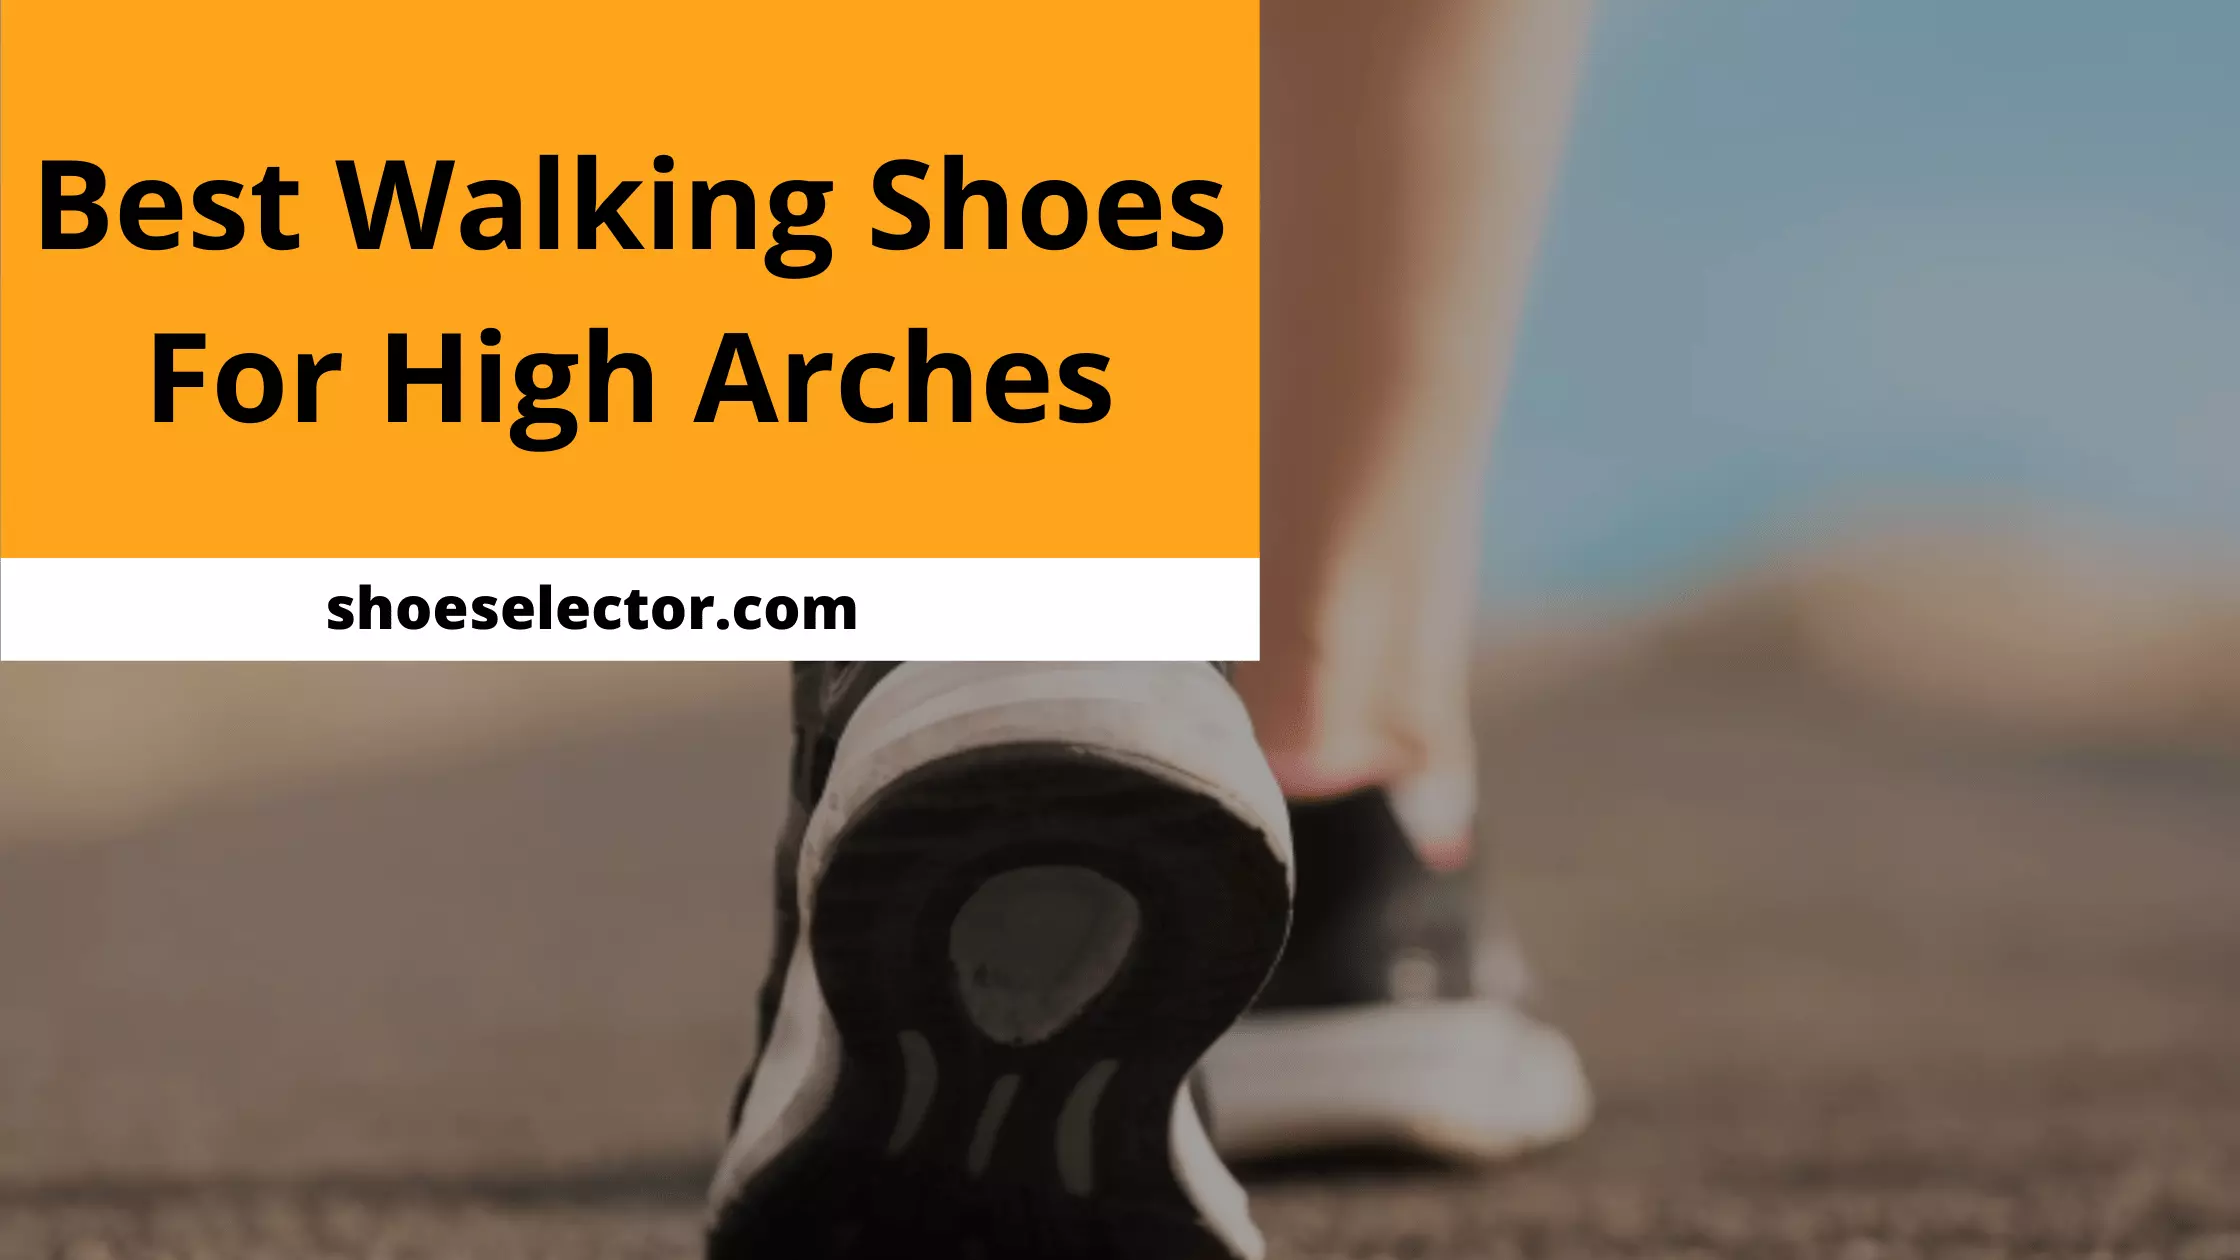 Best Walking Shoes For High Arches - Recommended By Experts